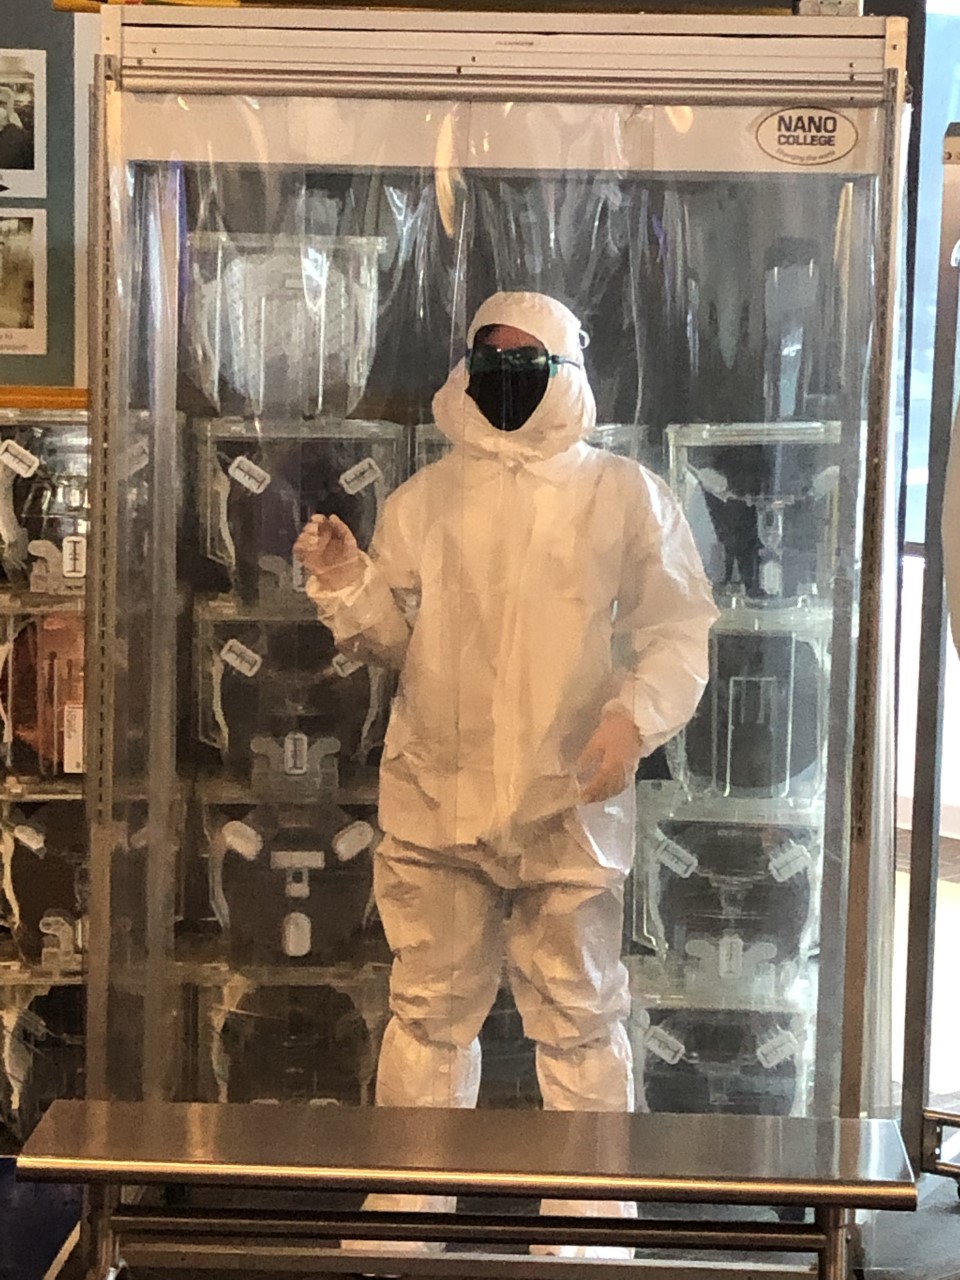 Student in a cleanroom and cleanroom protection